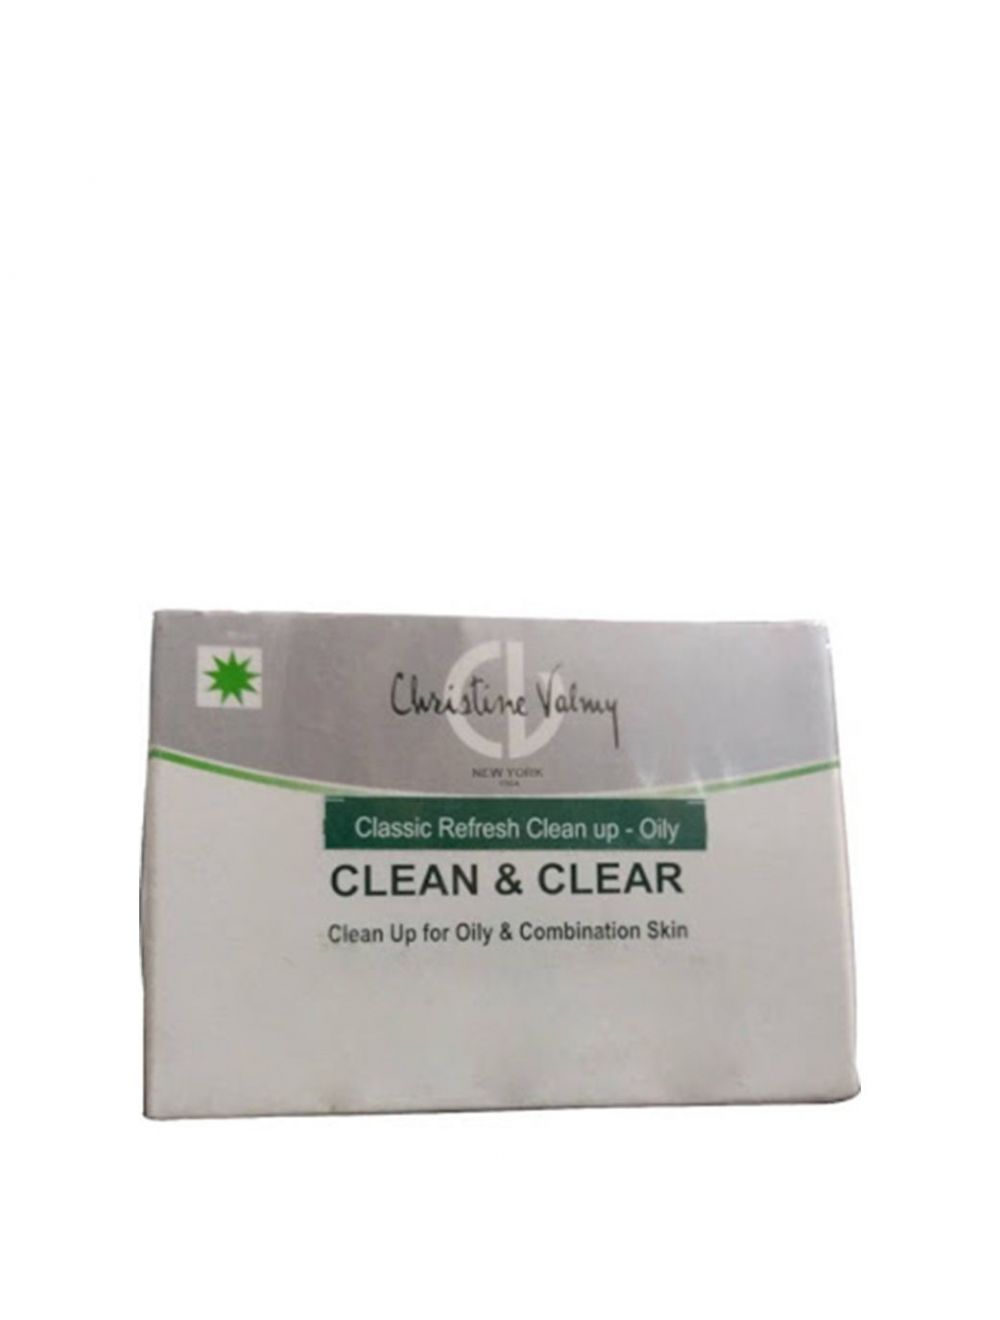 Christine Valmy CV Clean & Clear Clean up for Oily & Combination skin - Niram